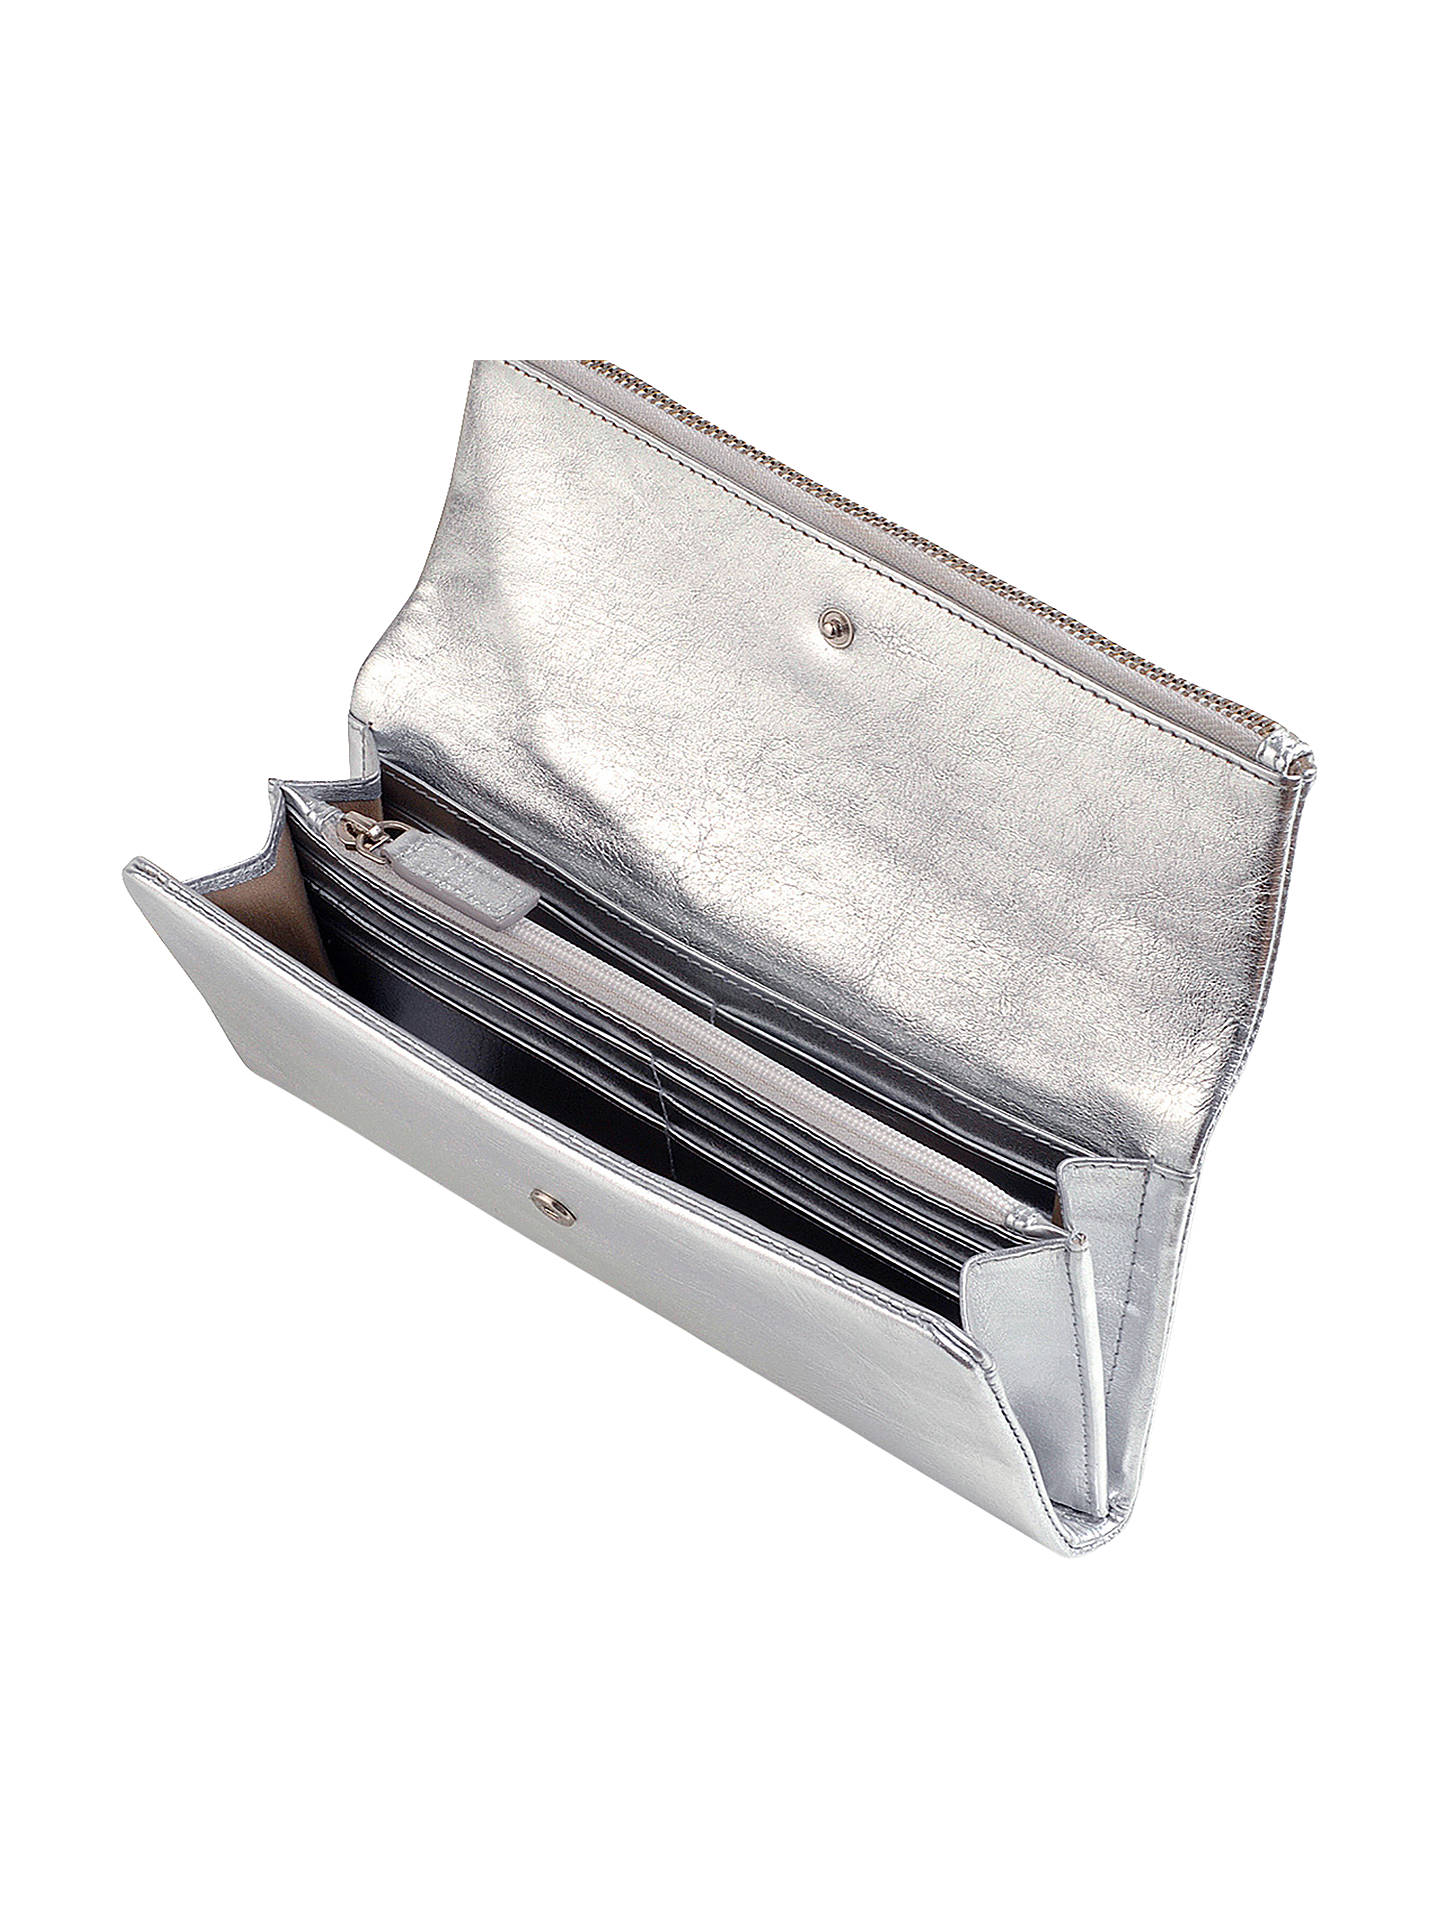 Radley Coleman Street Large Leather Foldover Matinee Purse, Silver at ...